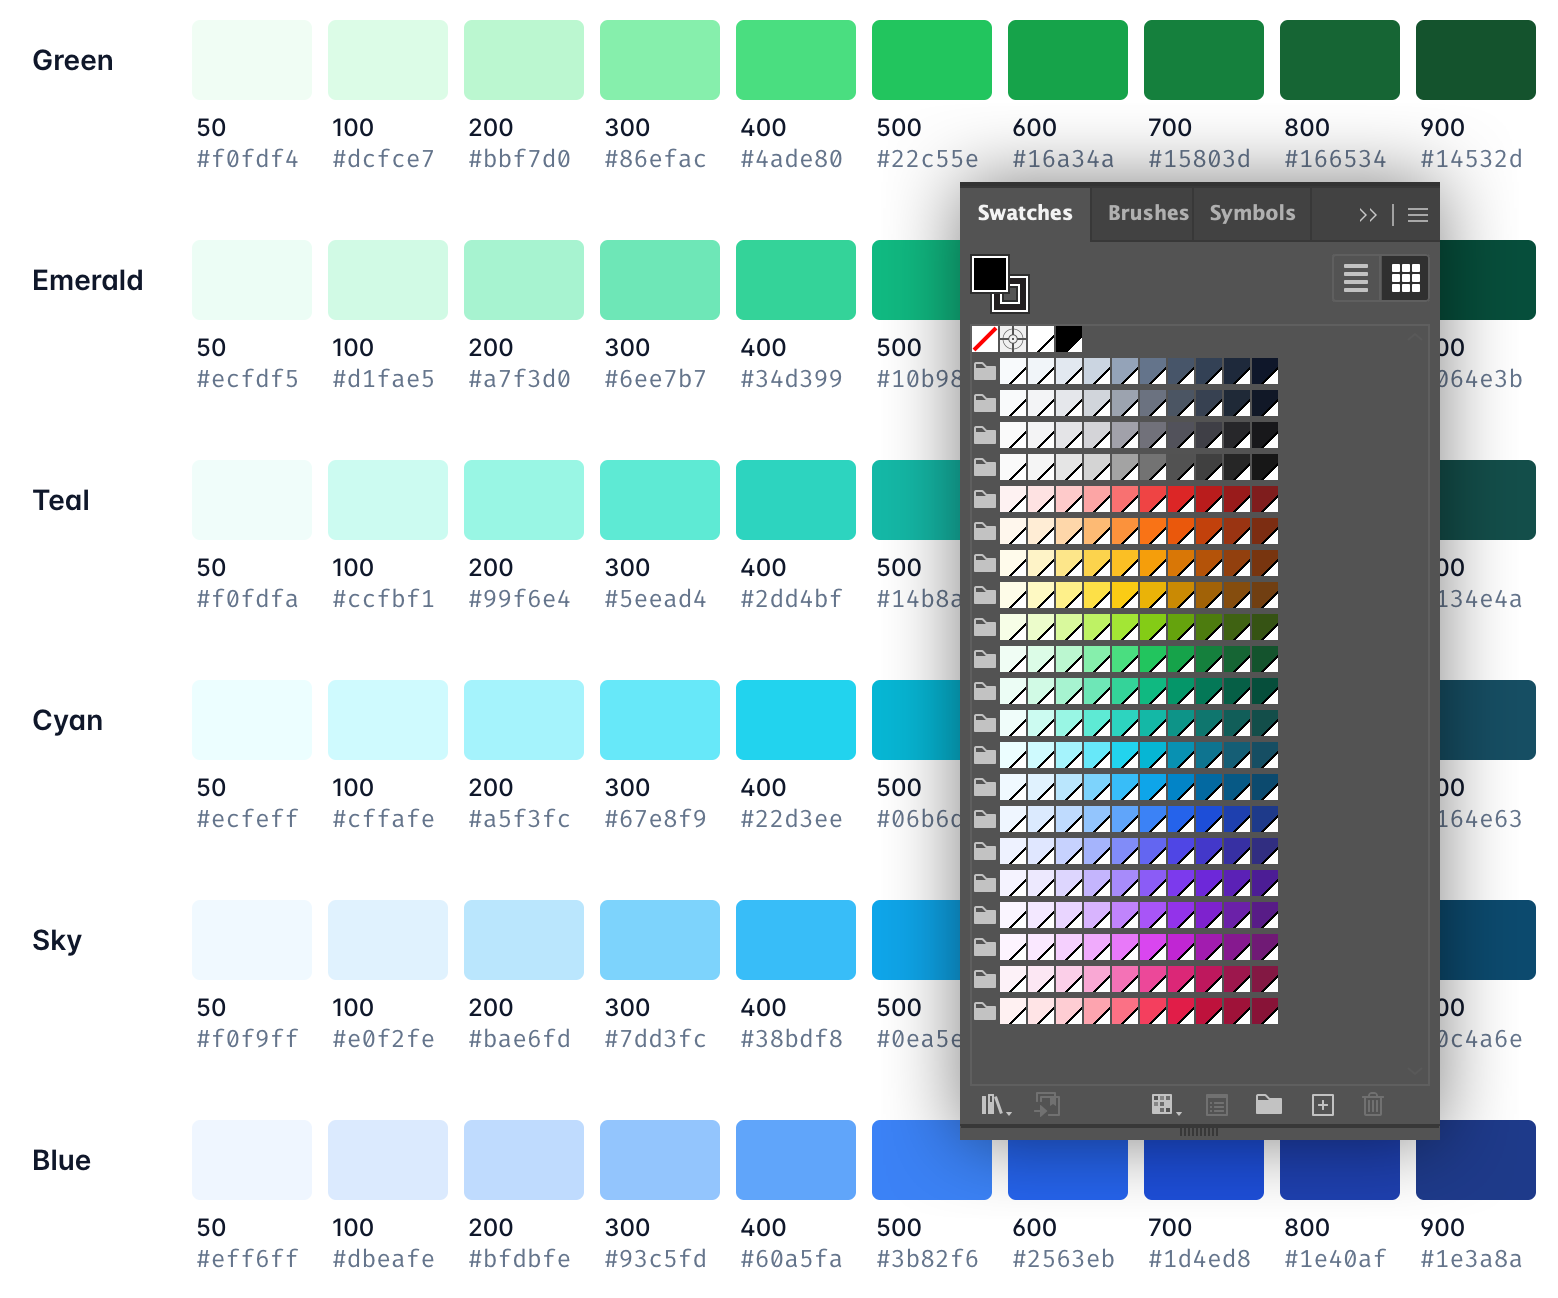 Adobe Illustrator swatch panel overlaid on a screenshot of the Tailwind color system